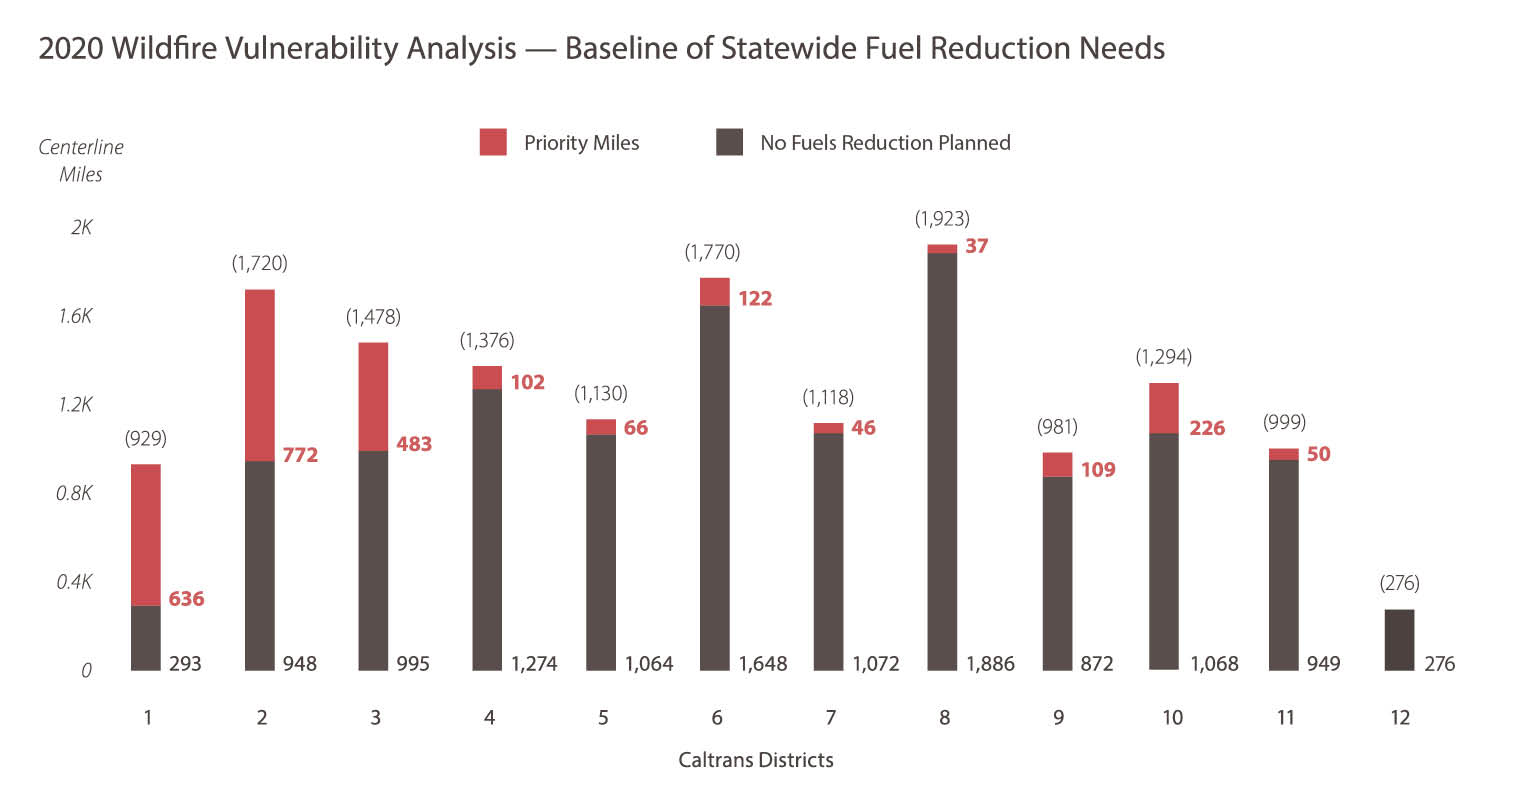 Figure: Bar Chart Statewide Fuel Reduction Needs District 1: Centerline miles: 929. Priority Miles: 636. No Fuels Reduction Planned: 293 District 2: Centerline miles: 1,720. Priority Miles: 772. No Fuels Reduction Planned: 948 District 3: Centerline miles: 1,478. Priority Miles: 483. No Fuels Reduction Planned: 995 District 4: Centerline miles: 1,376. Priority Miles: 102. No Fuels Reduction Planned: 1,274 District 5: Centerline miles: 1,130. Priority Miles: 66. No Fuels Reduction Planned: 1,064 District 6: Centerline miles: 1,770. Priority Miles: 122. No Fuels Reduction Planned: 1,648 District 7: Centerline miles: 1,118. Priority Miles: 46. No Fuels Reduction Planned: 1,072 District 8: Centerline miles: 1,923. Priority Miles: 37. No Fuels Reduction Planned: 1,886 District 9: Centerline miles: 981. Priority Miles: 109. No Fuels Reduction Planned: 872 District 10: Centerline miles: 1,294. Priority Miles: 226. No Fuels Reduction Planned: 1,068 District 11: Centerline miles: 999. Priority Miles: 50. No Fuels Reduction Planned: 949 District 12: Centerline miles: 276. Priority Miles: 0. No Fuels Reduction Planned: 276 